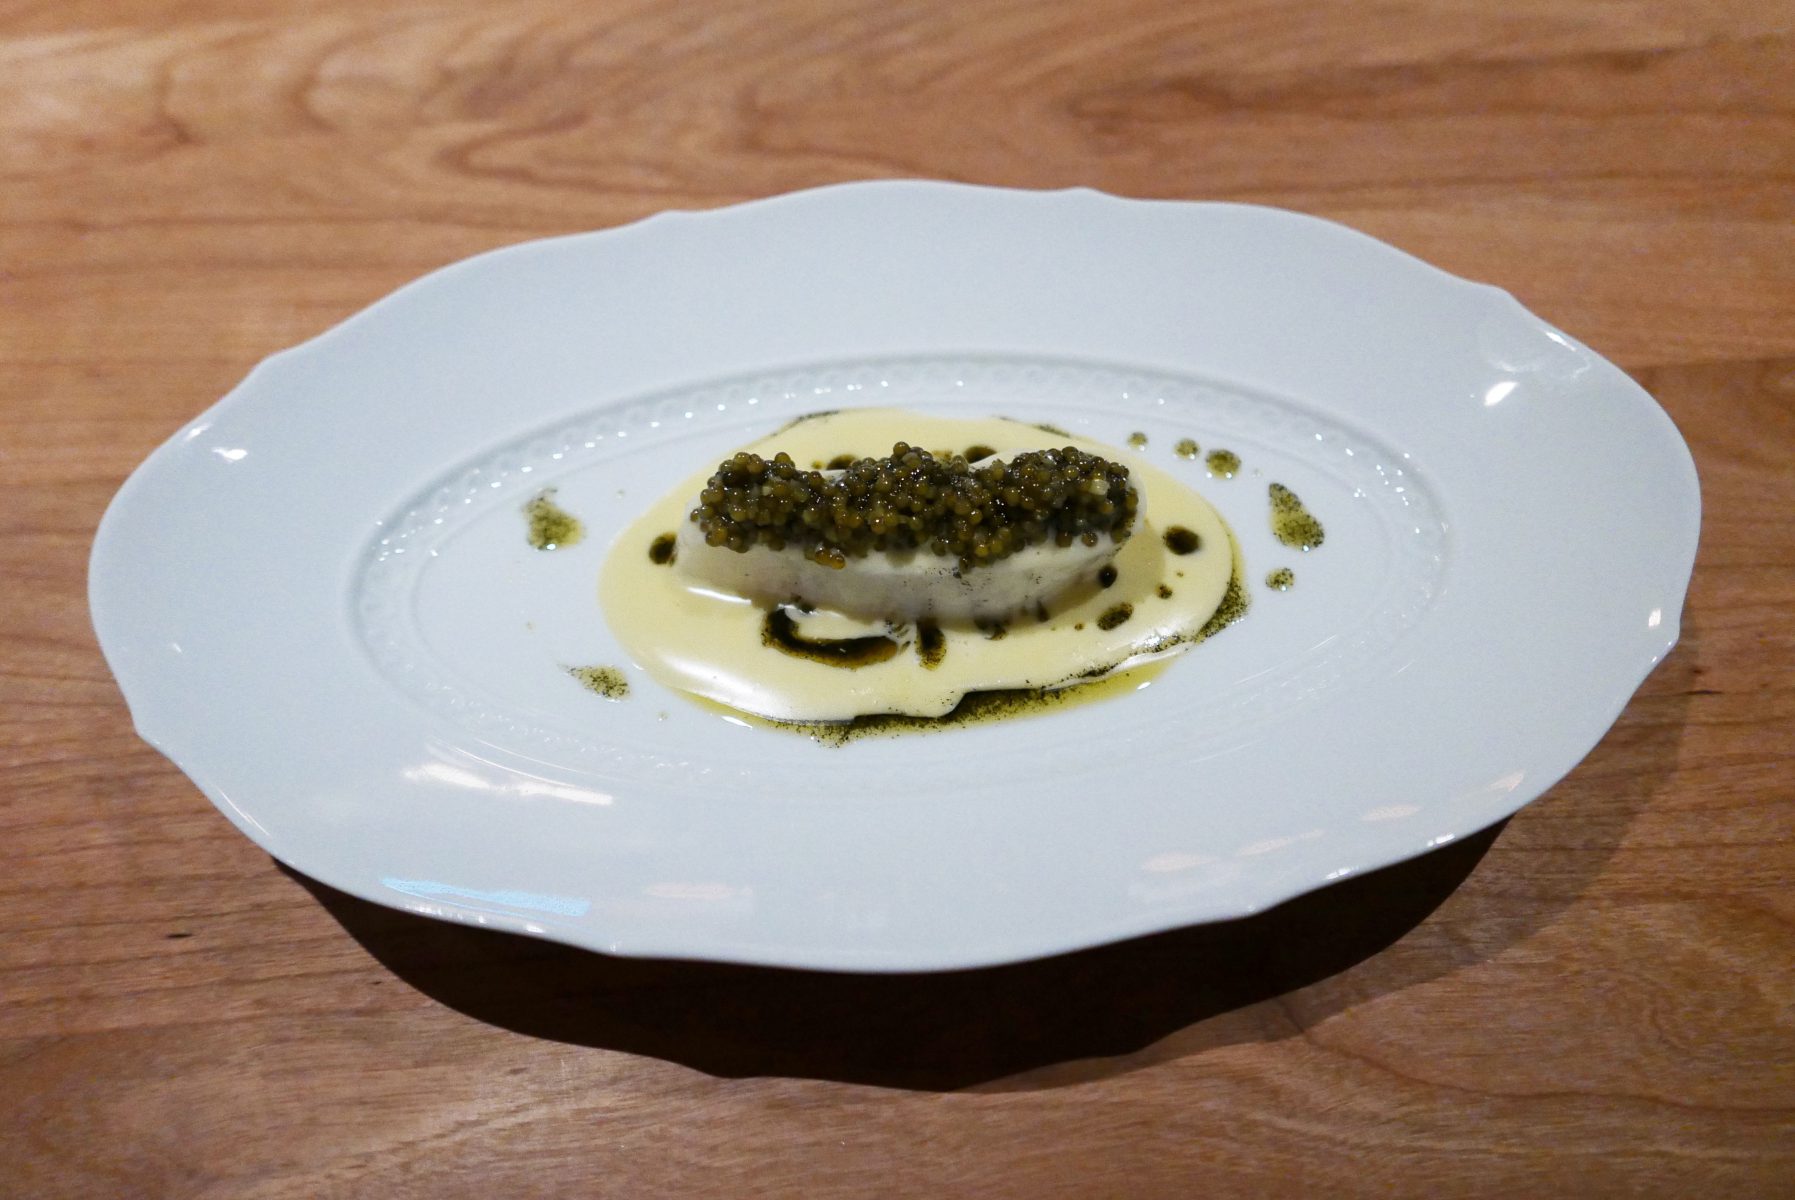 Baked wild turbot, fermented wild asparagus juice,Rossini caviar,beurre noisette with toasted seaweed at Frantzén, Stockholm.